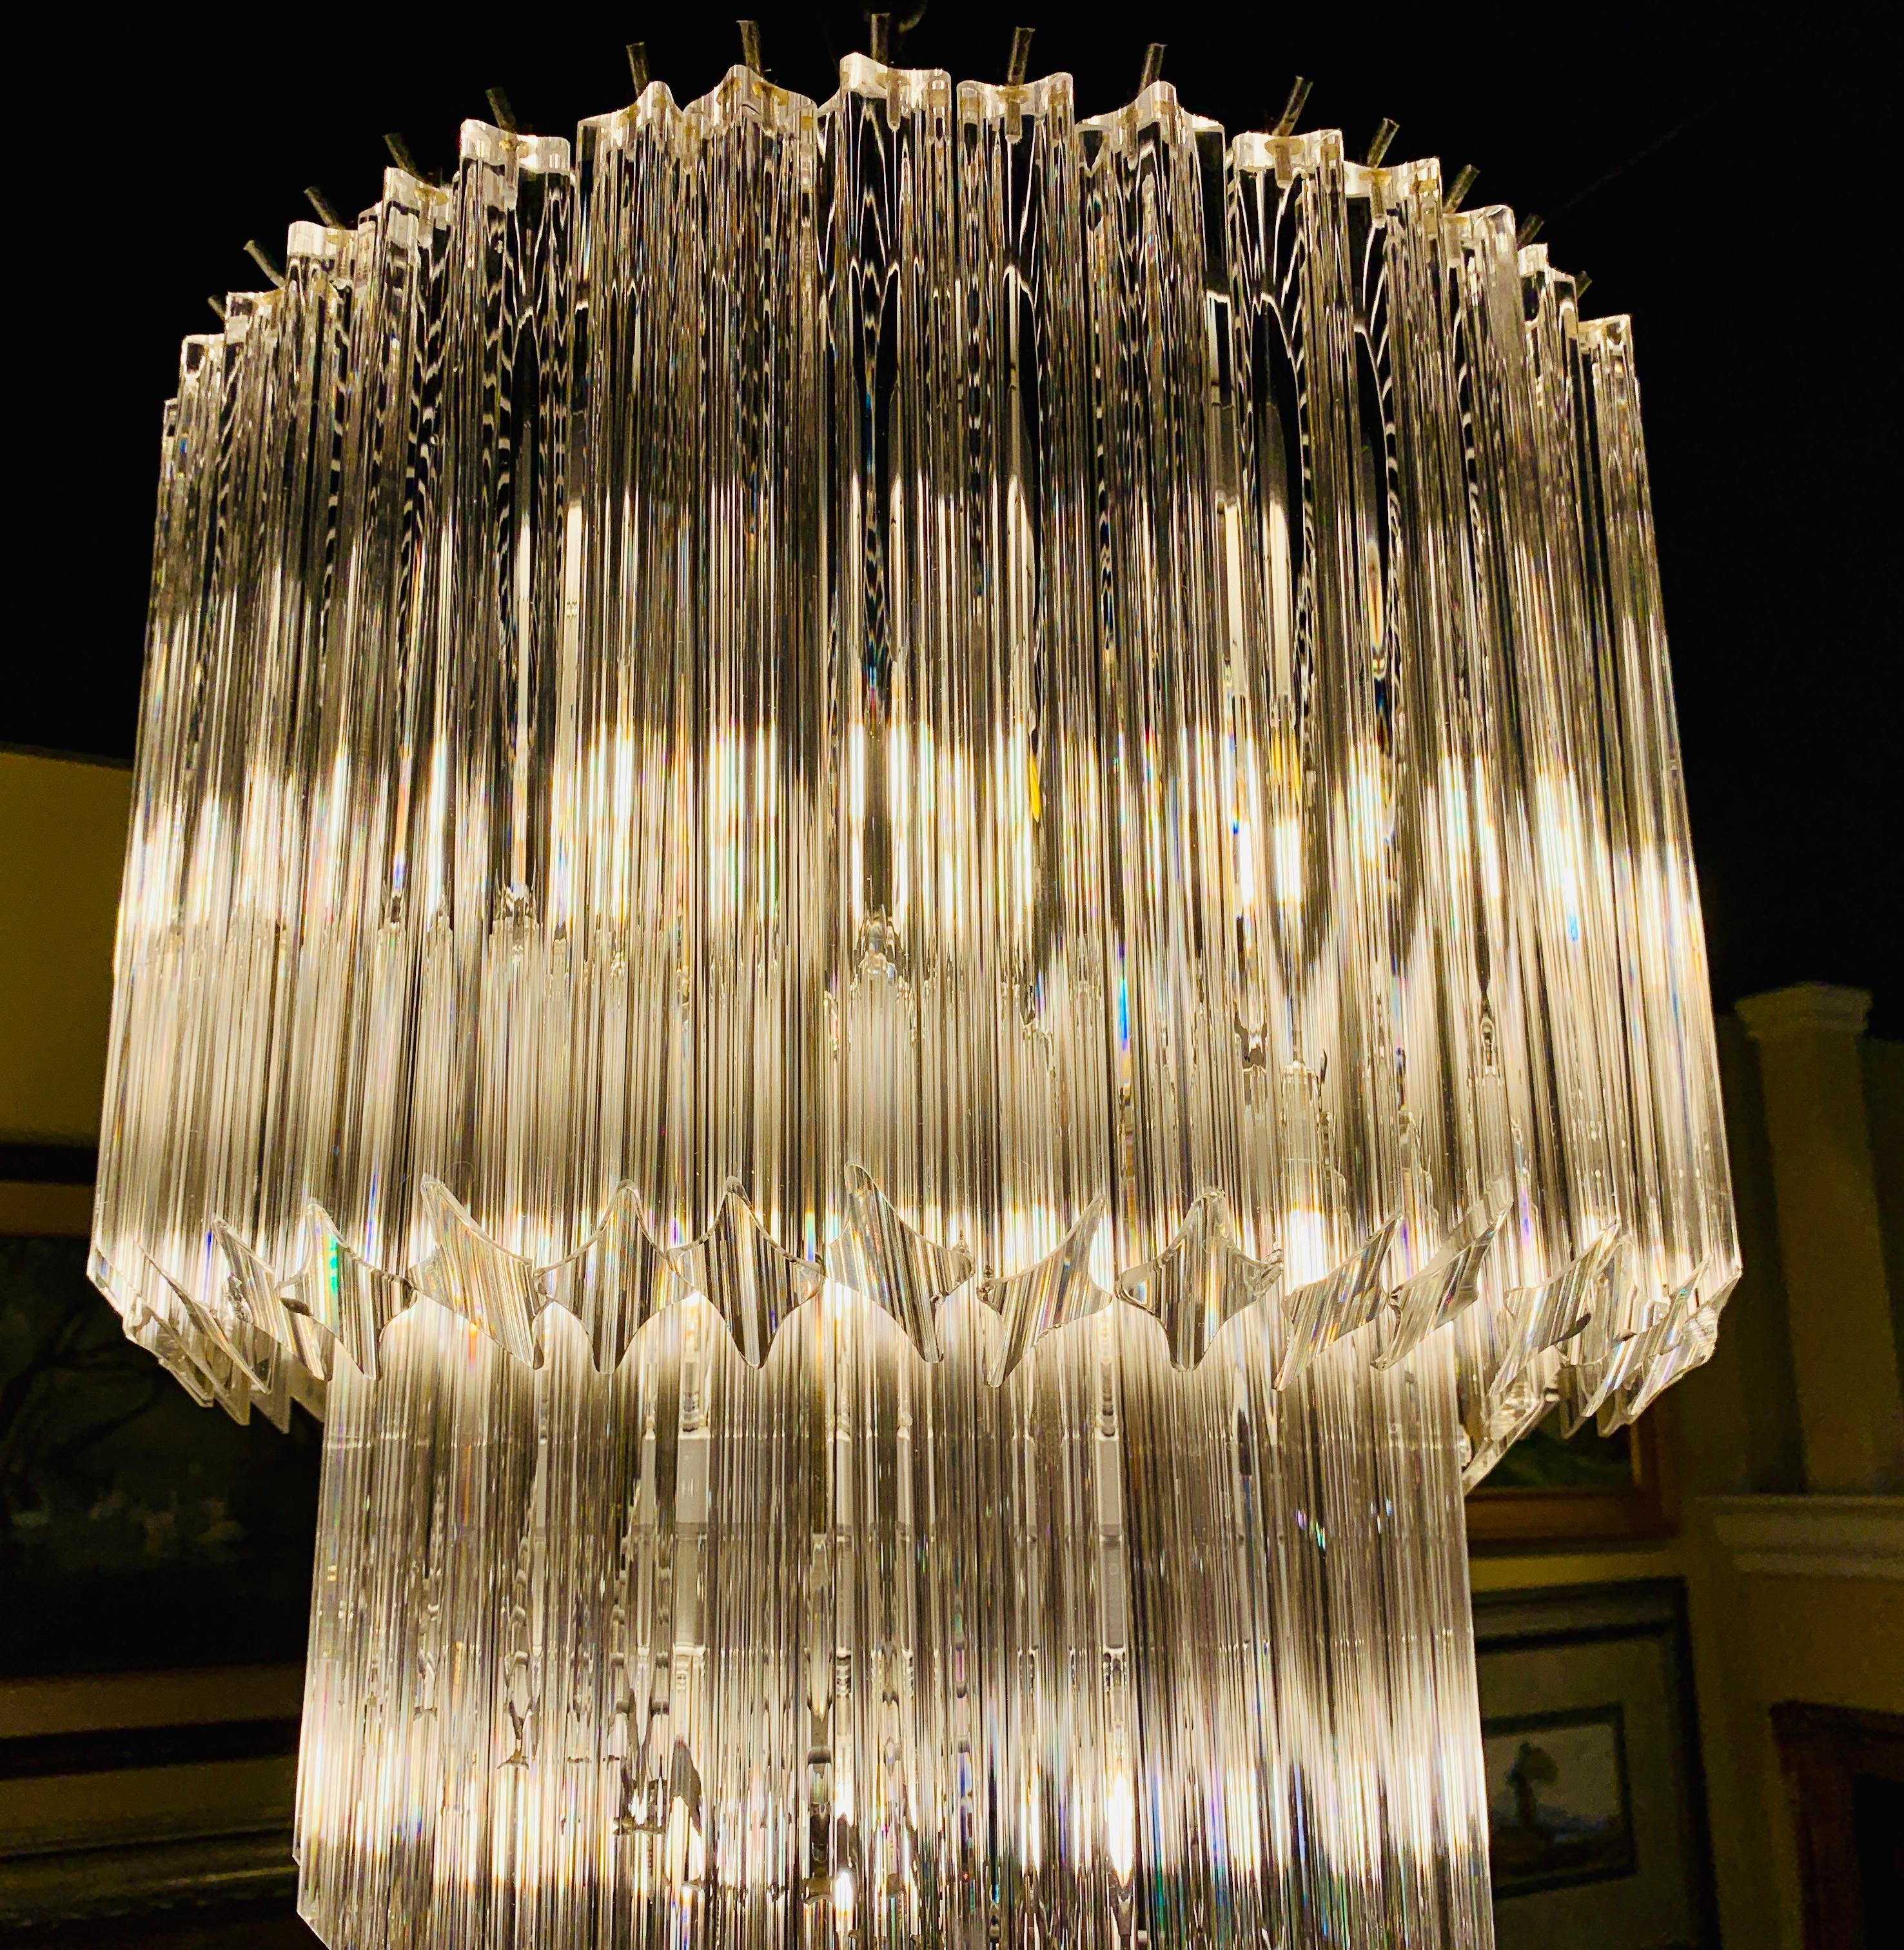 Glamorous Italian Midcentury Five-Tier Spiral Murano Glass Prism Chandelier In Good Condition For Sale In Tustin, CA